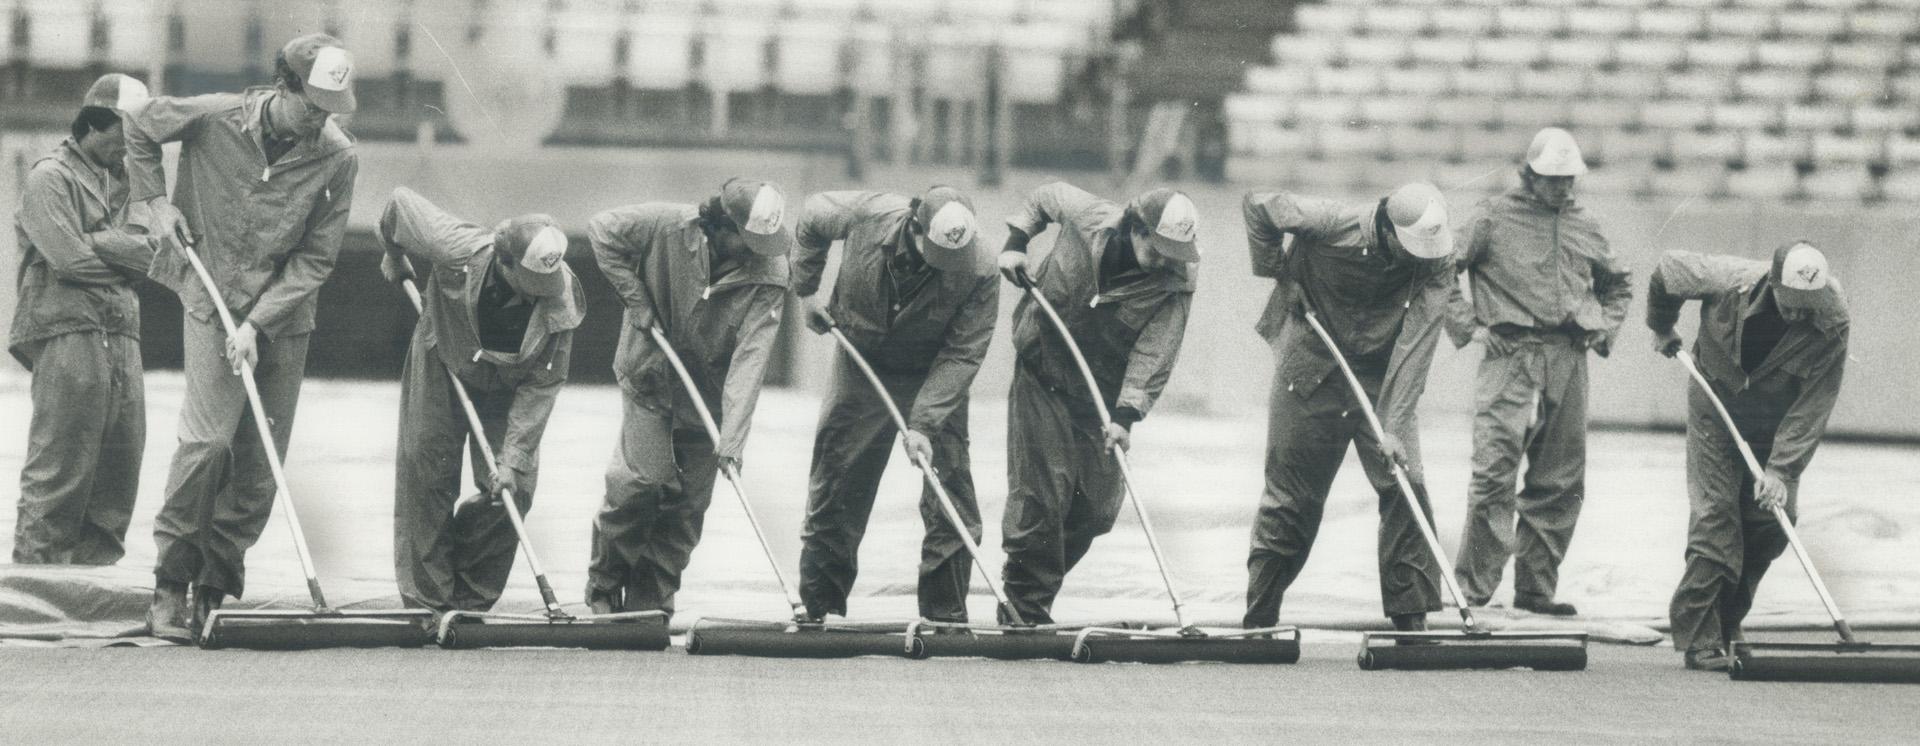 Roller-to-roller and shoulder-to-shoulder, the grounds crew at Exhibition Stadium squeezes rainwater out of the artificial turf